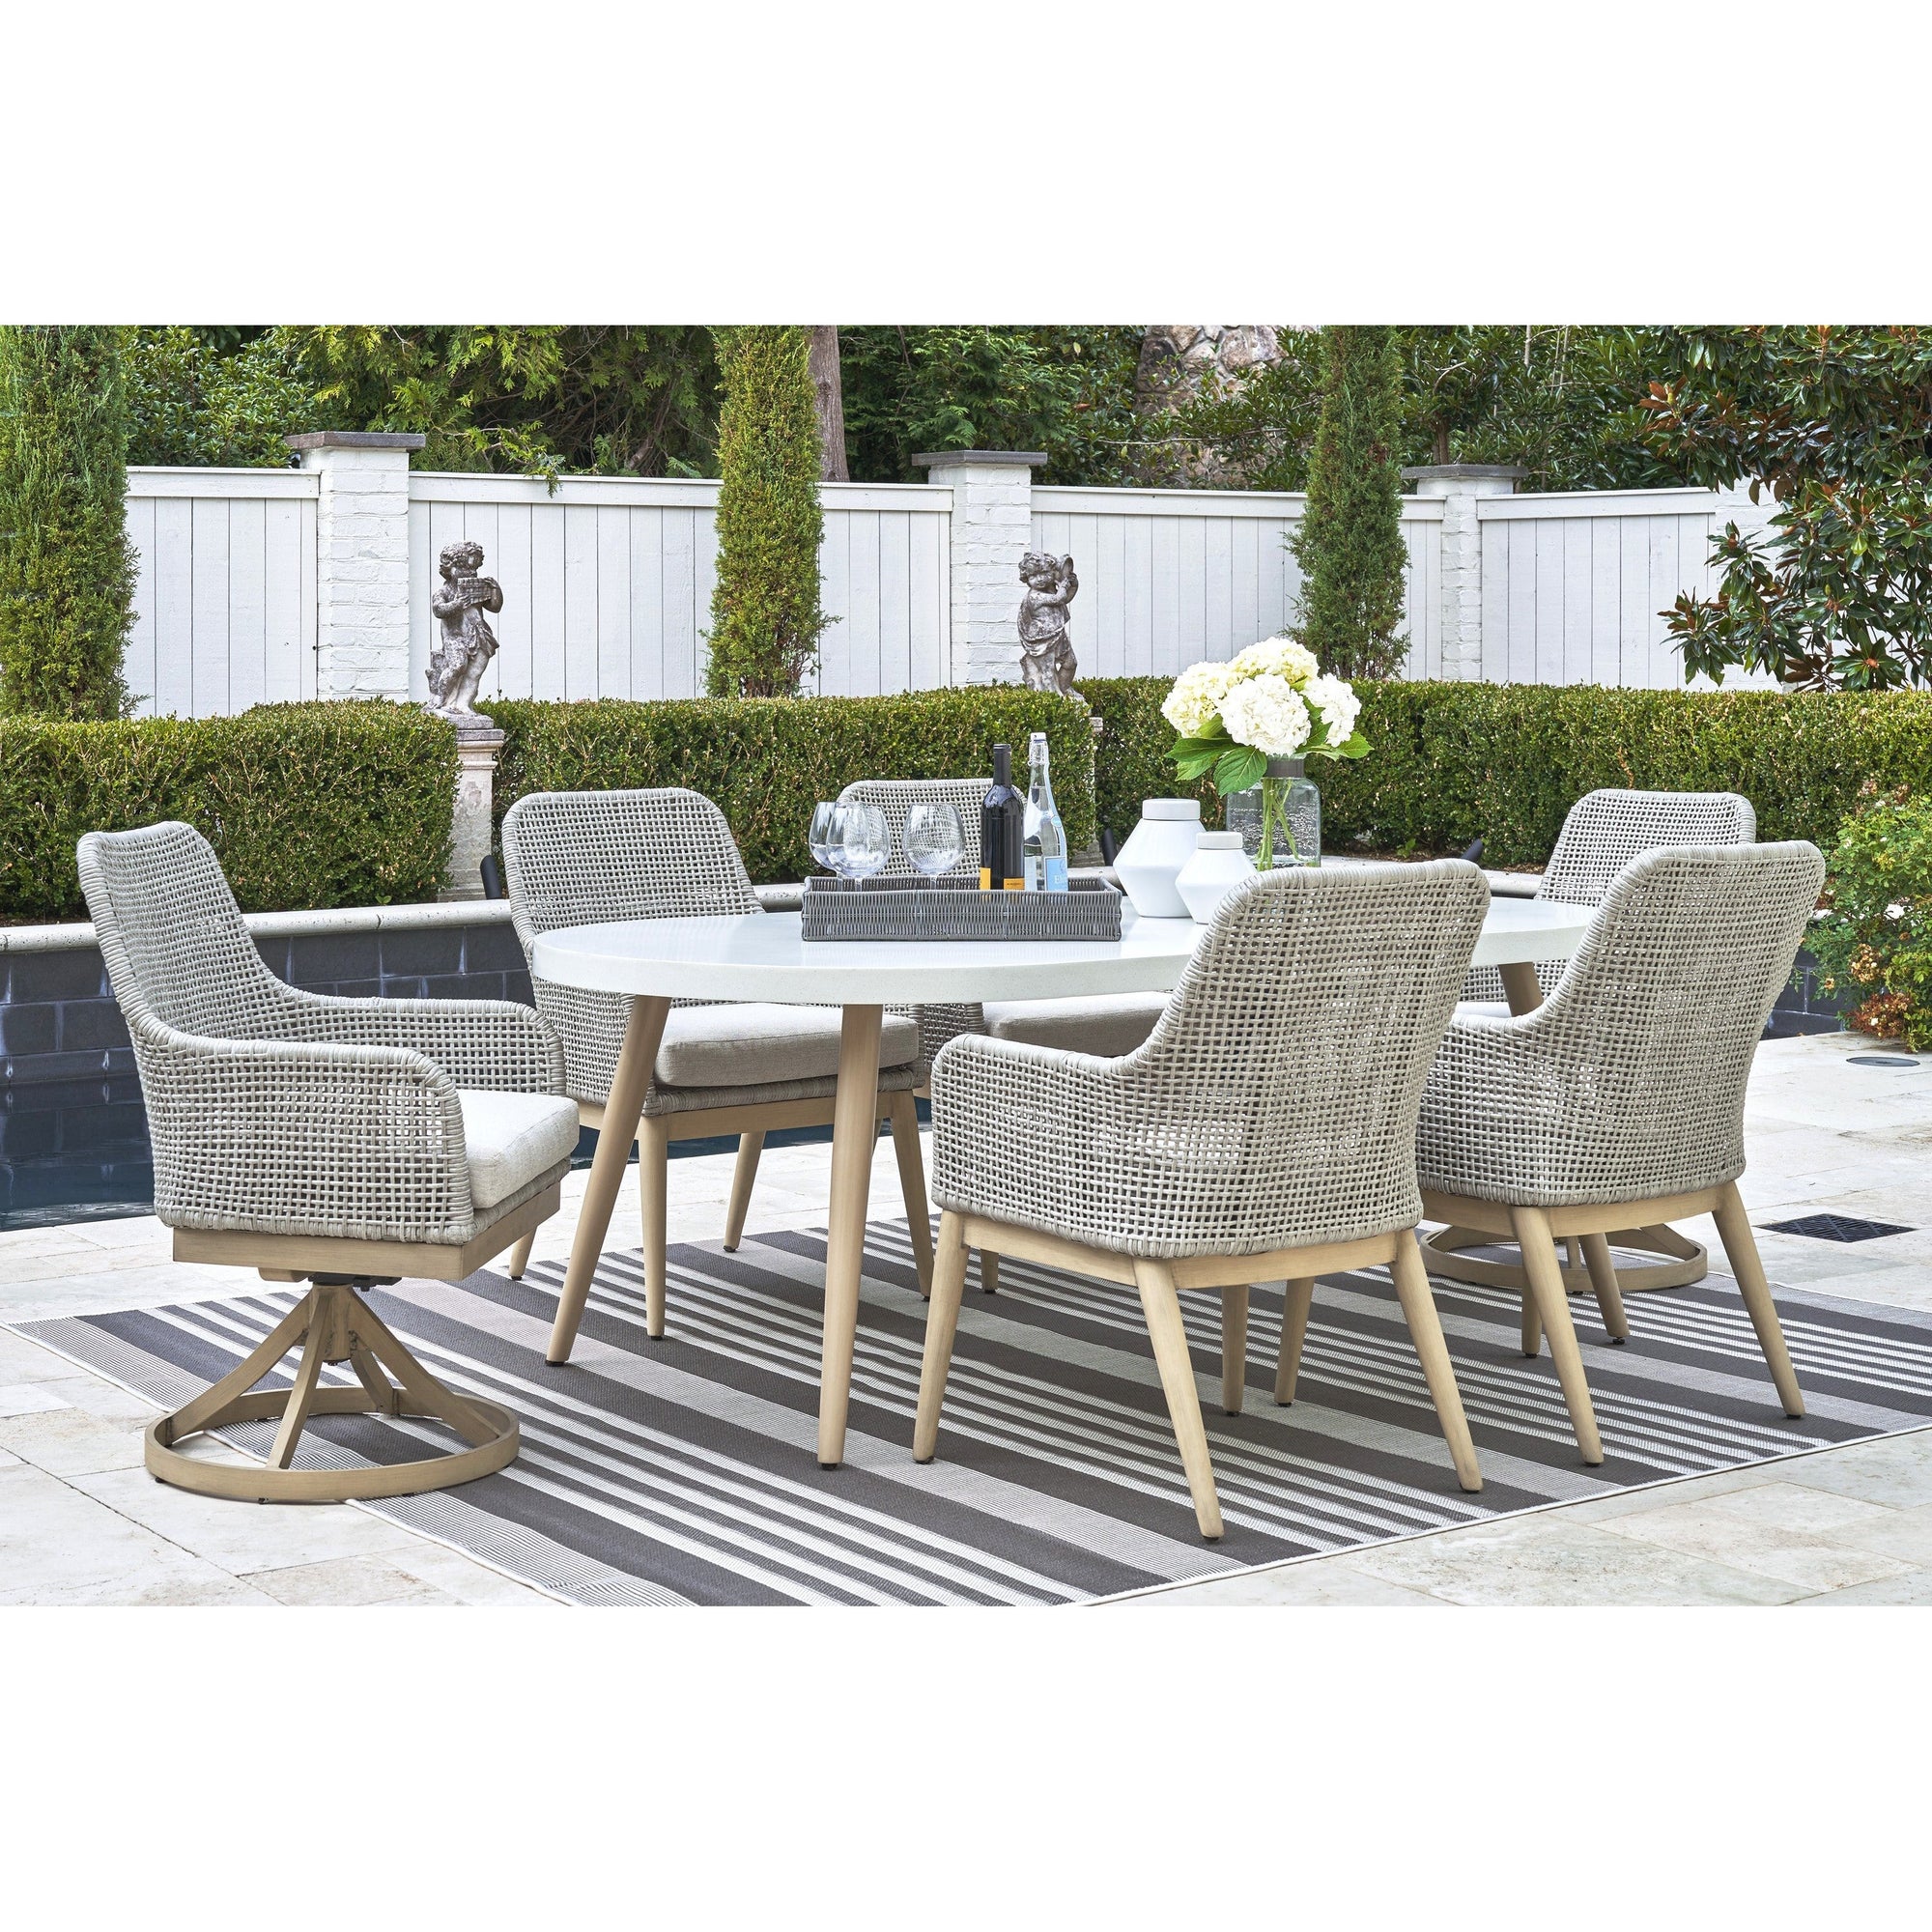 St. Barts Open Weave  7-Piece Outdoor Dining Set